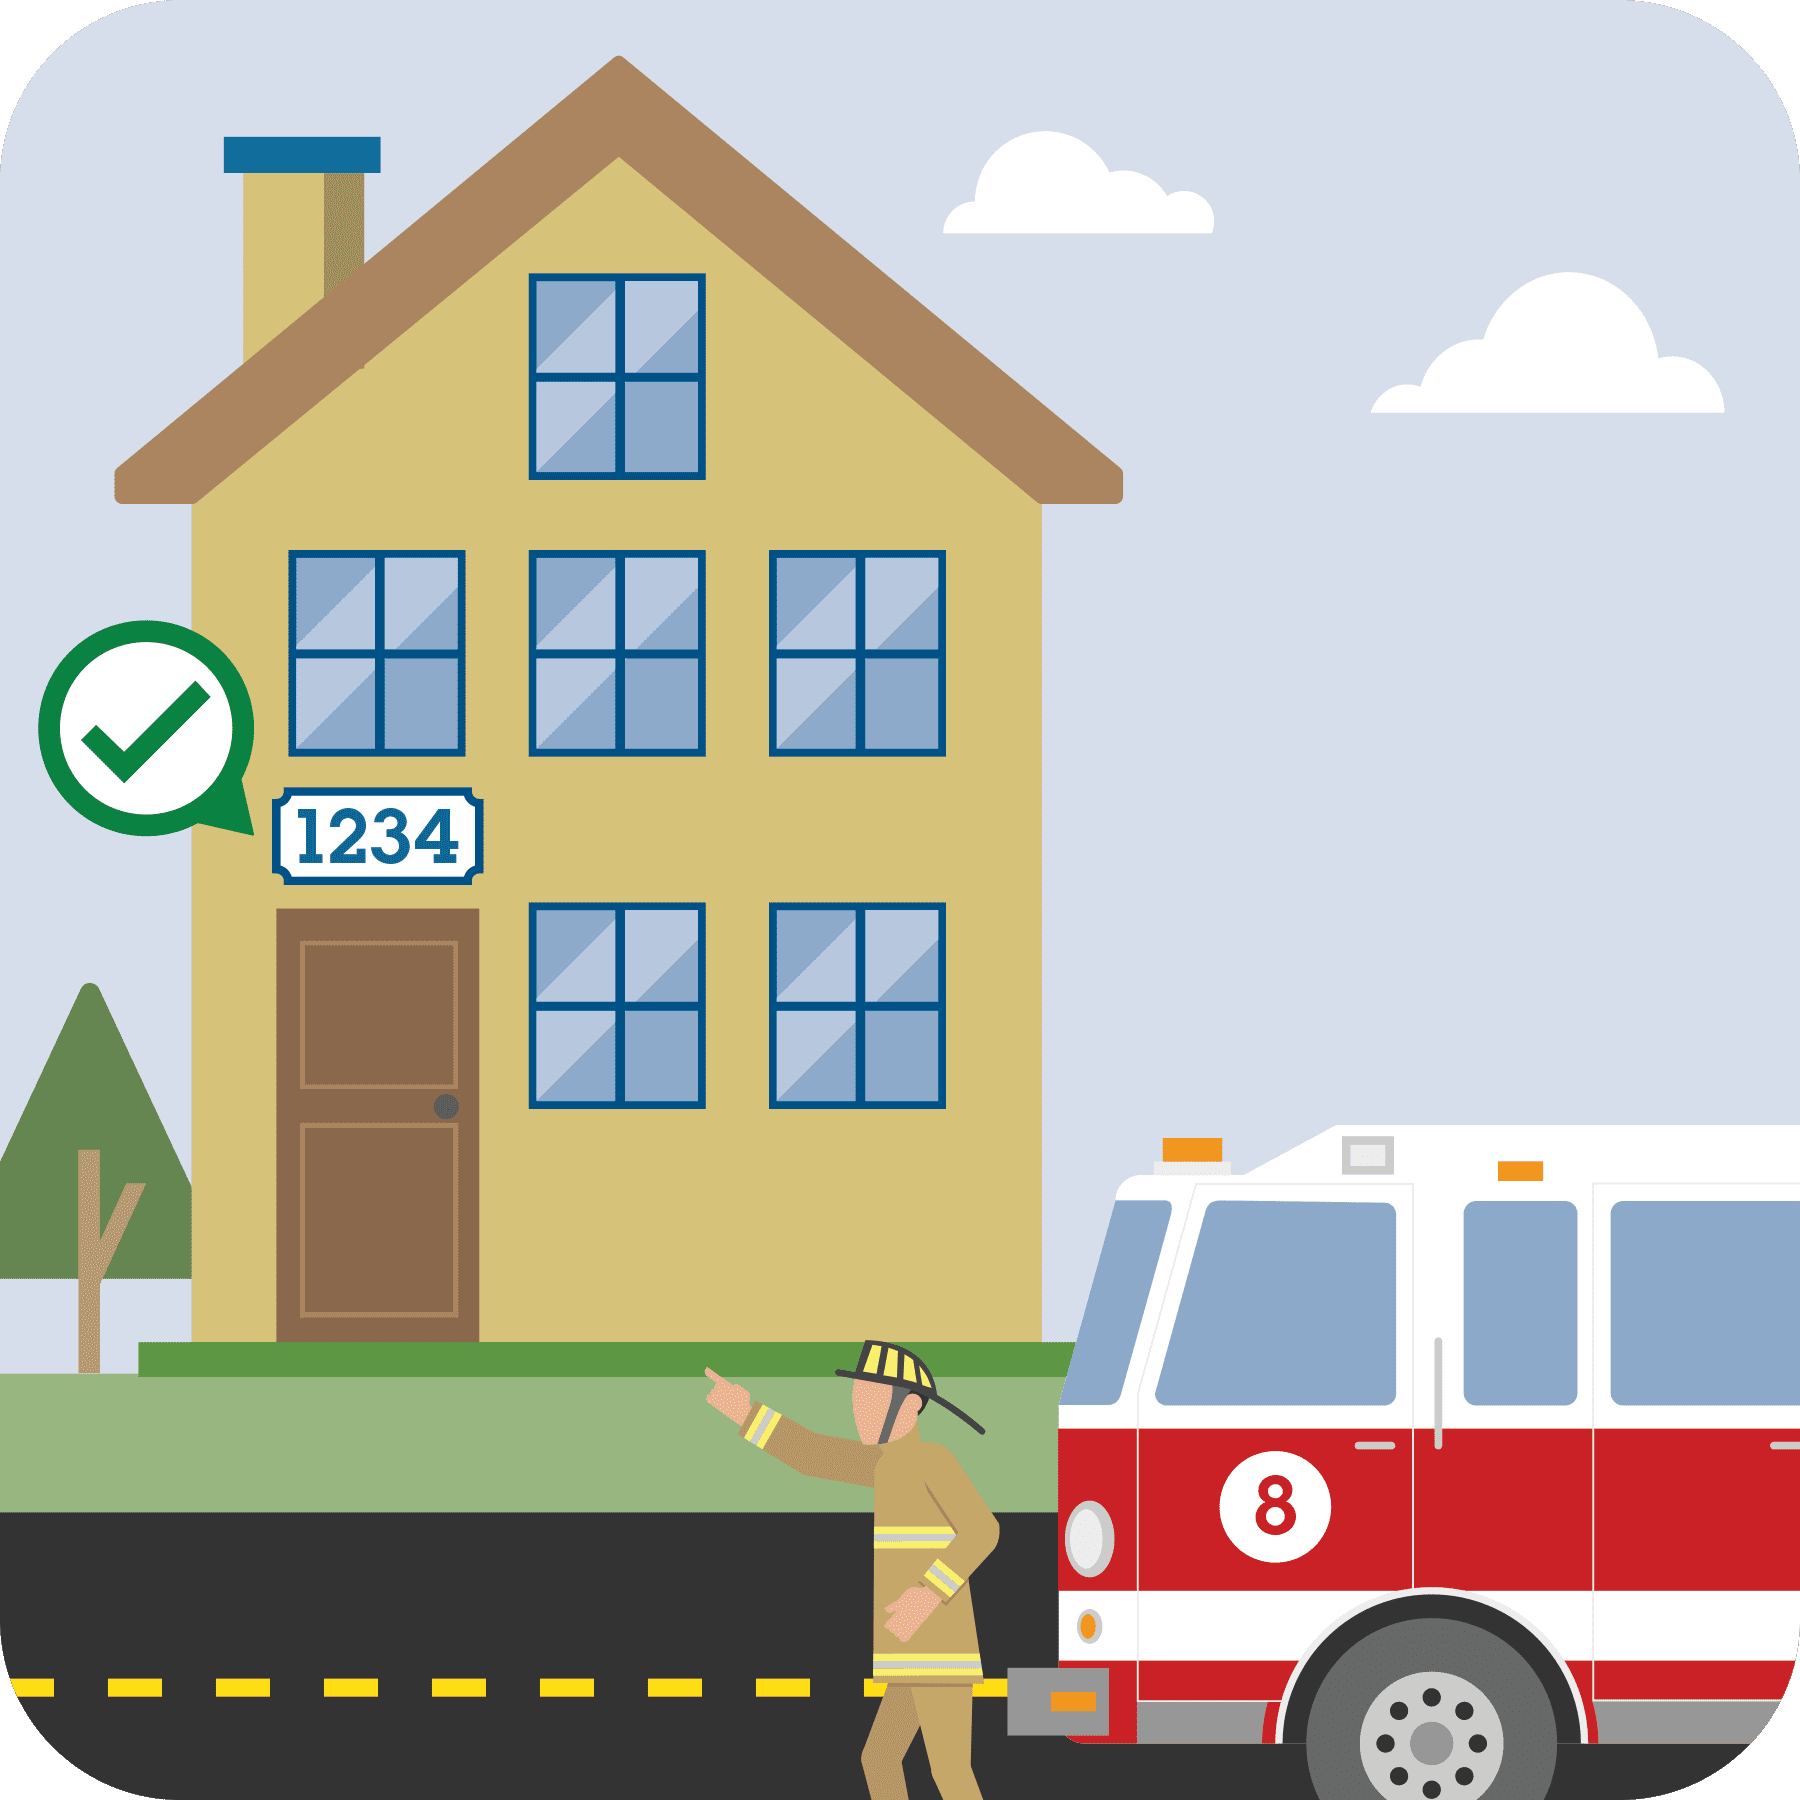 A firefighter pointing to a visible number on a house.